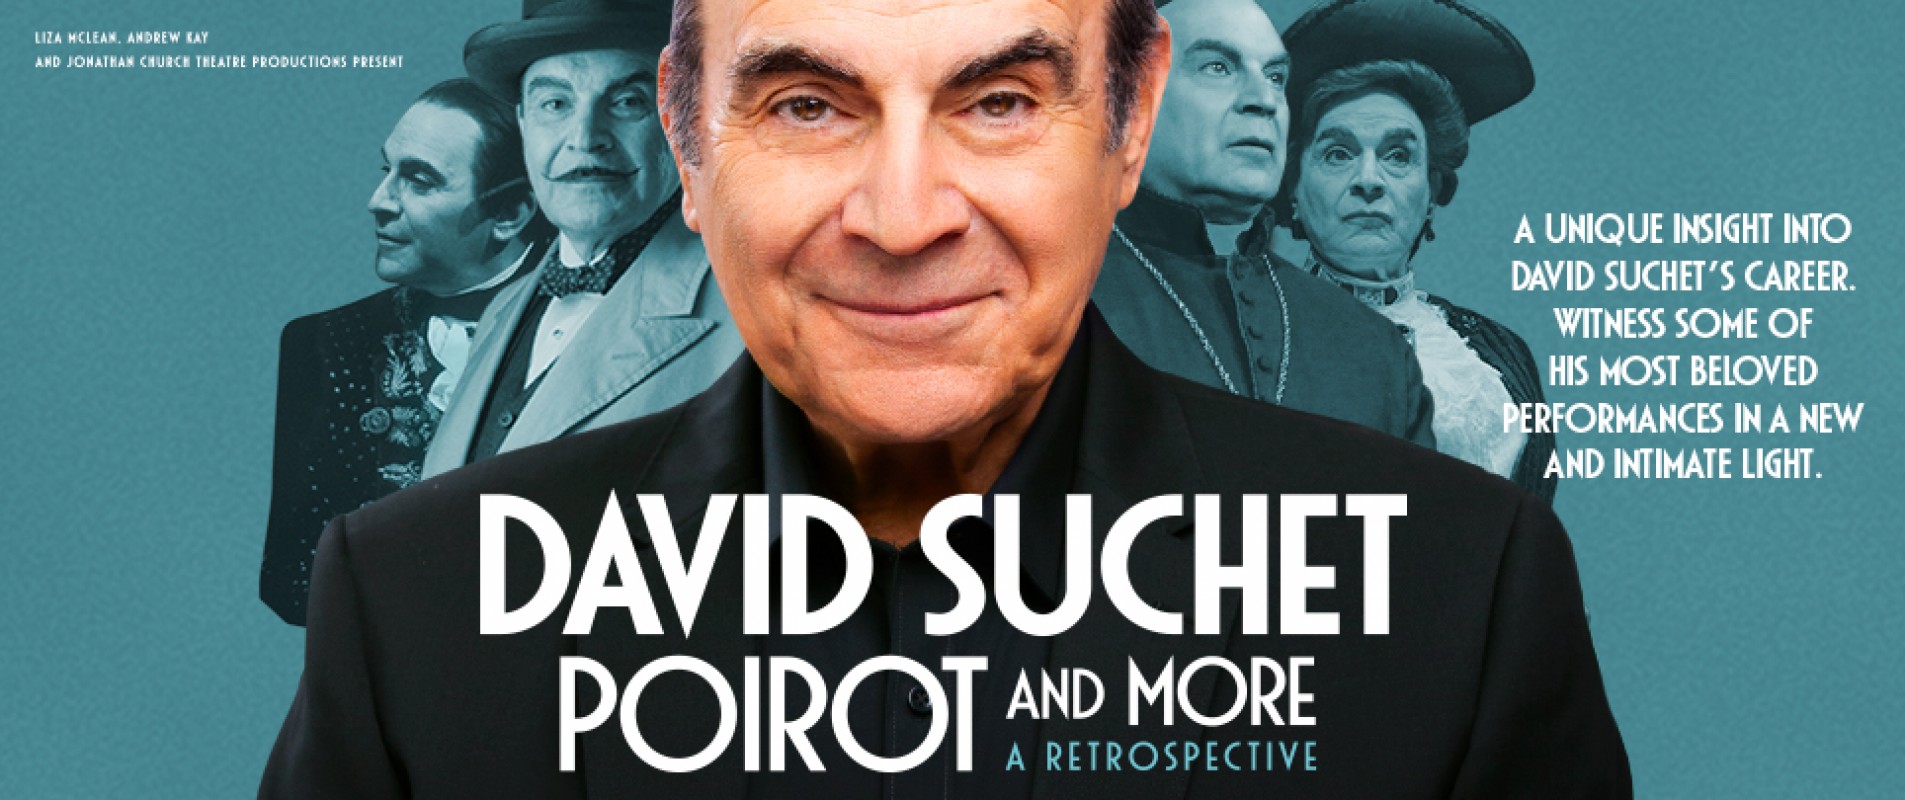 Poirot and More: A Retrospective